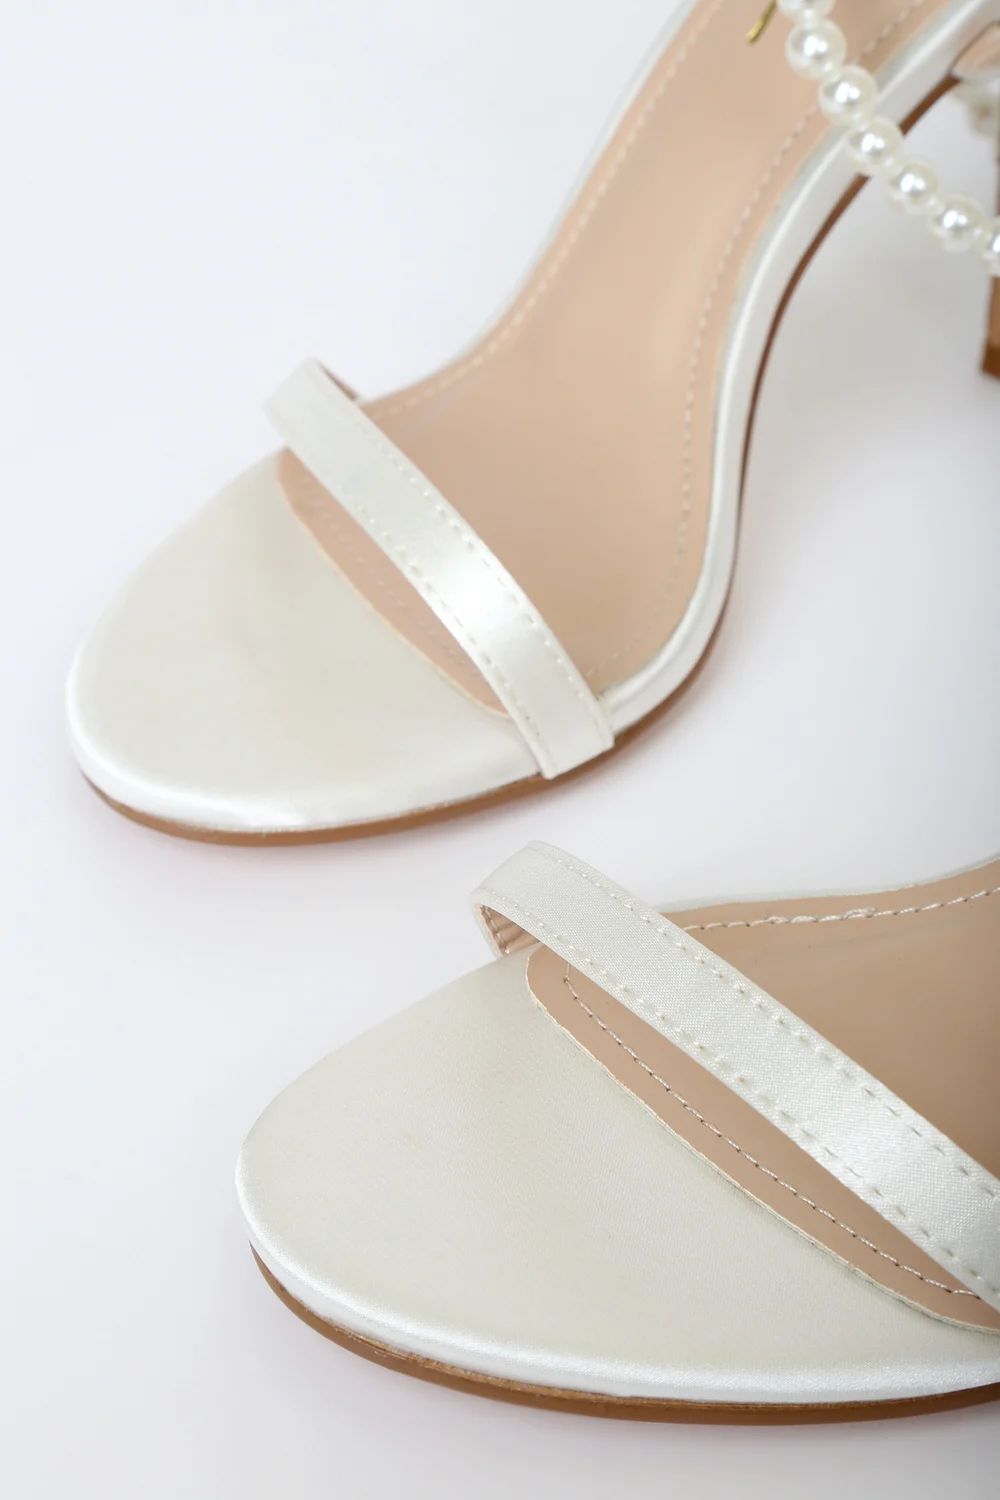 Letzy White Satin Pearl Lace-Up High Heel Sandals | Lulus (US)